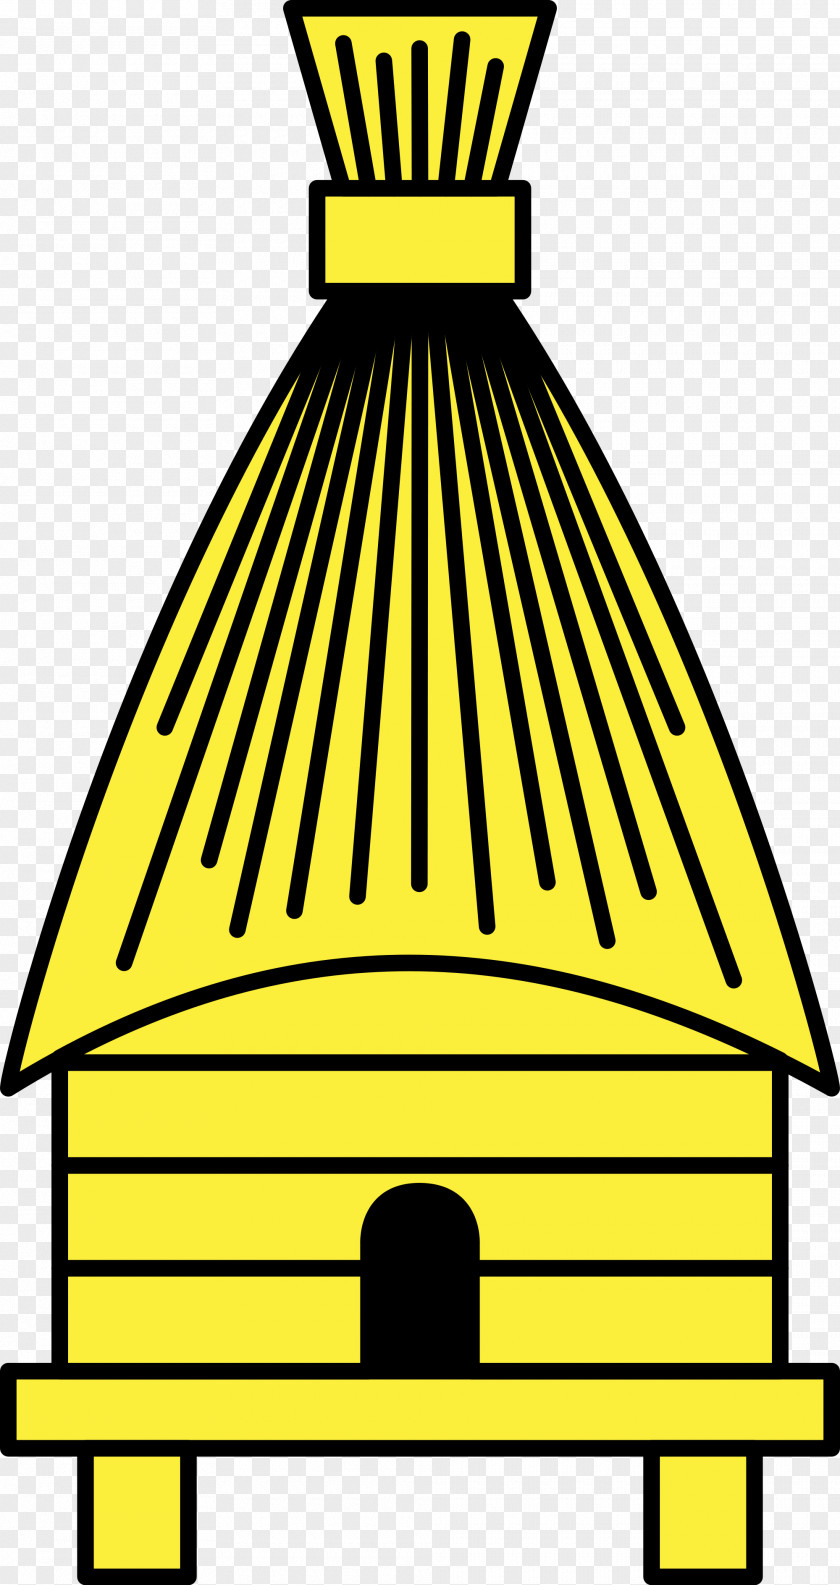 Hive Sign Clip Art Wikipedia Computer File Document Wikimedia Commons PNG